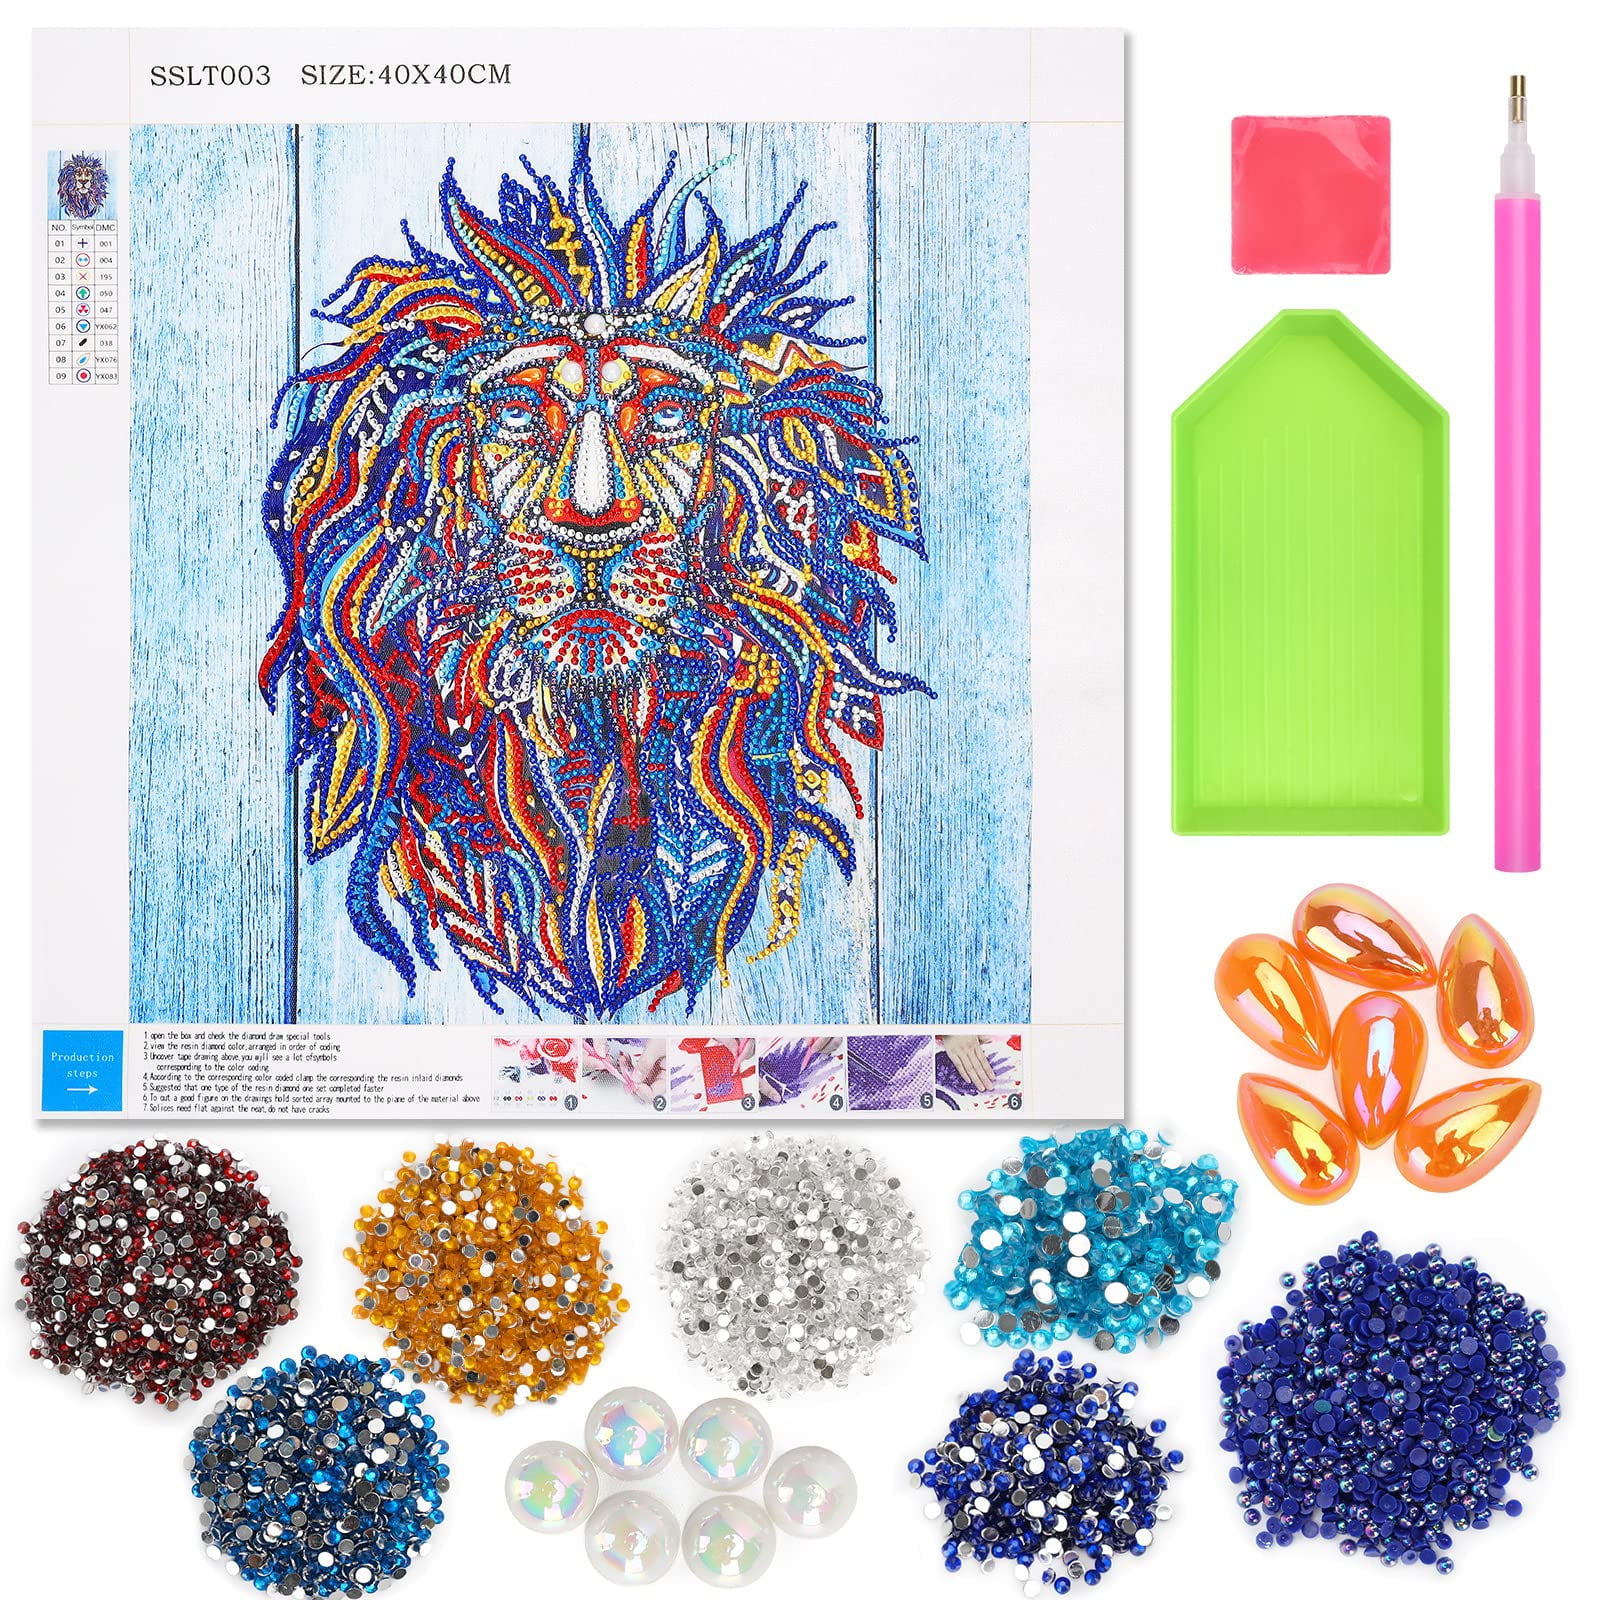 Kids 5D Diamond Painting Art Kits: Art and Crafts for Boys Girls Age 8 9 10  11 12 Birthday Gifts for Children Friends Wooden Frame Fox Diamond Dotz Painting  Kits Presents for